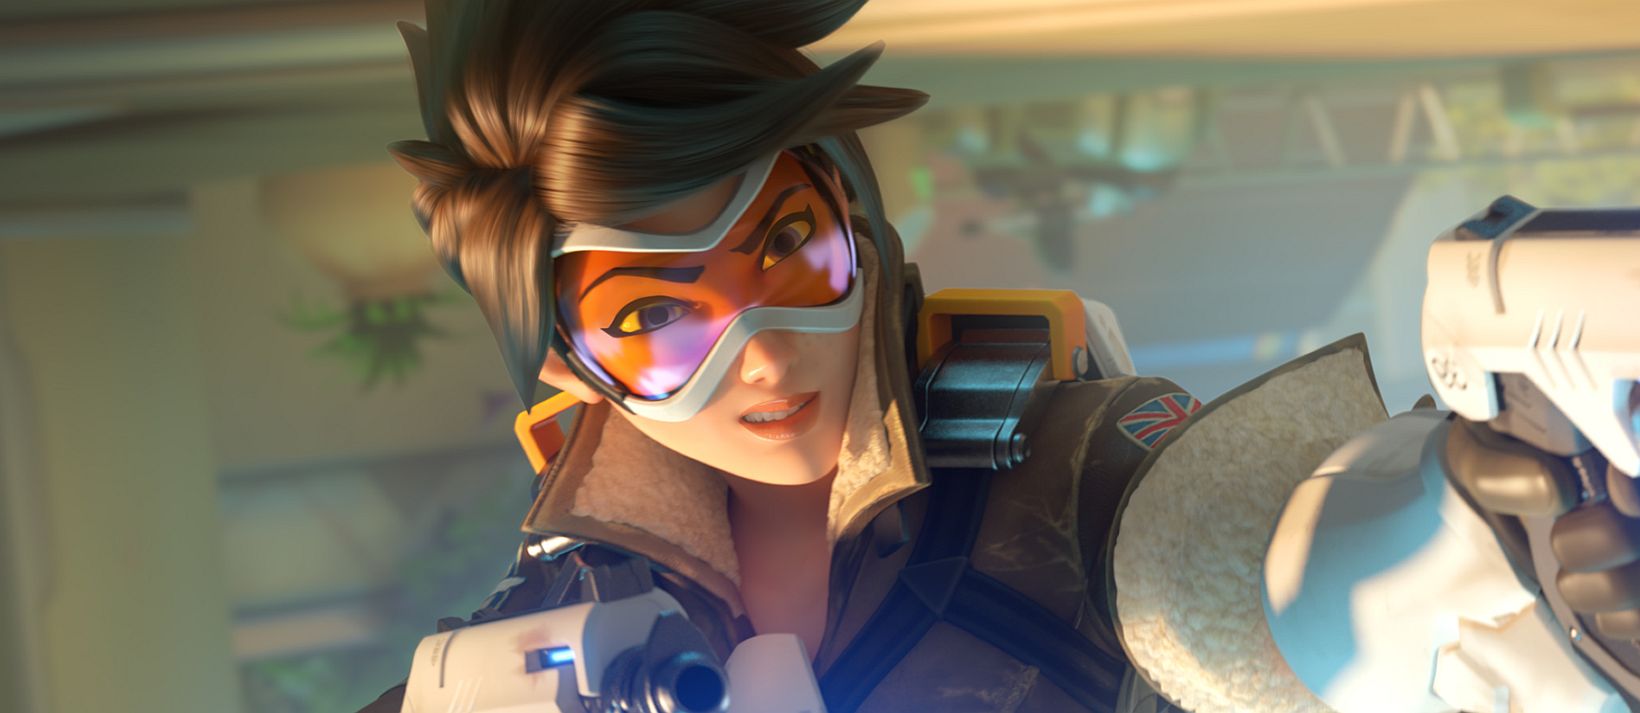 Image for Overwatch getting Hero Pools, Experimental Card, and more frequent updates